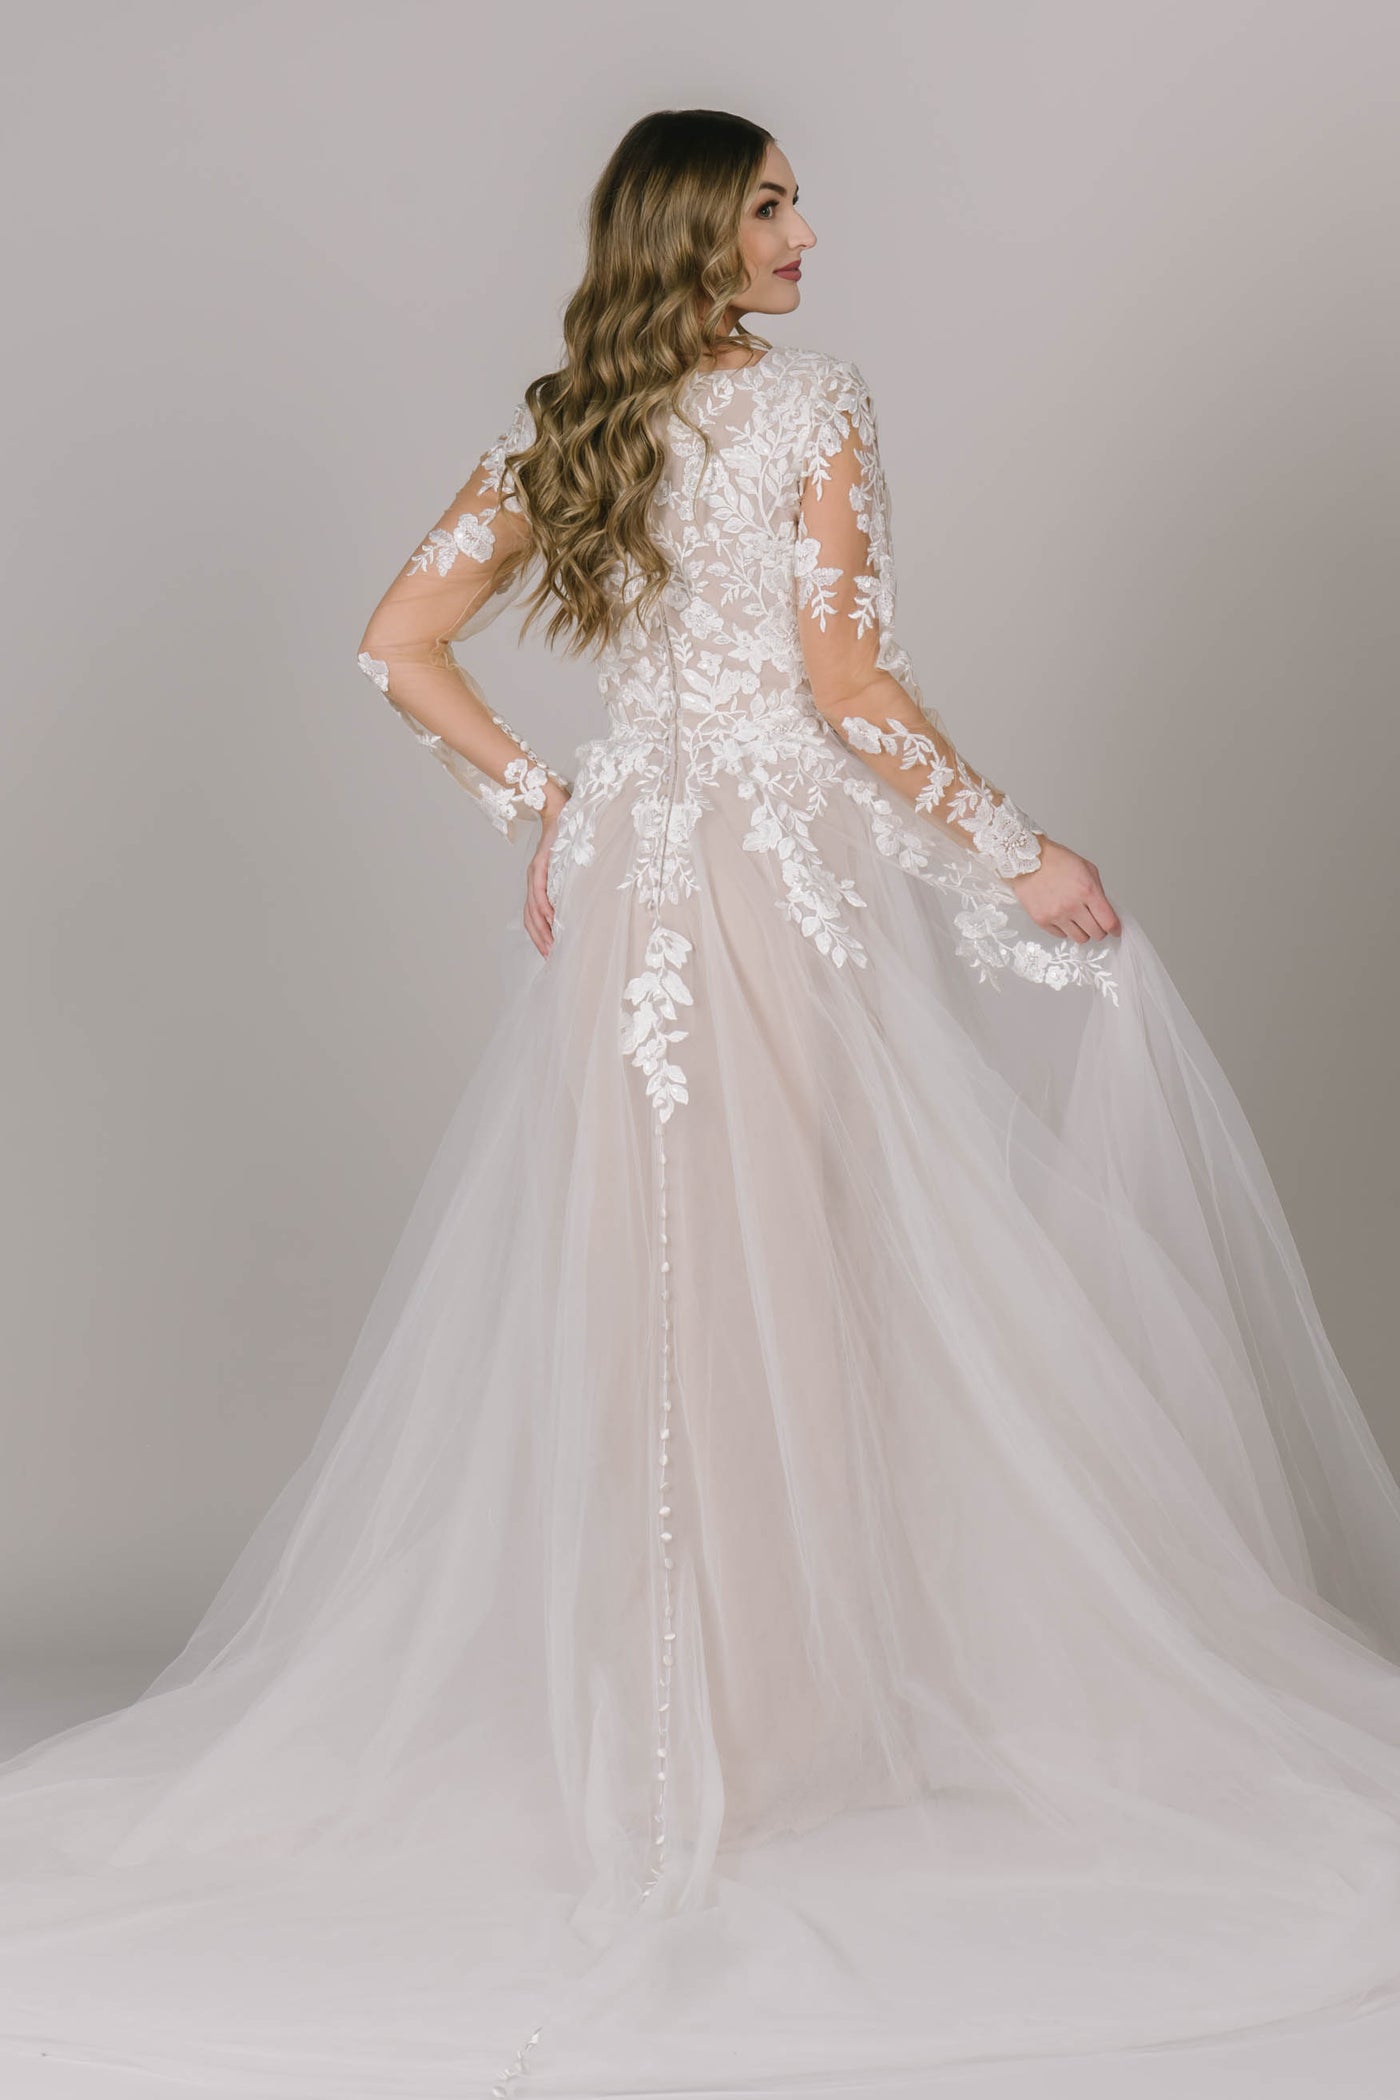 A back shot of this modest wedding dress with buttons downs the back of the dress, sheer long sleeves with applique, and a-line silhouette.